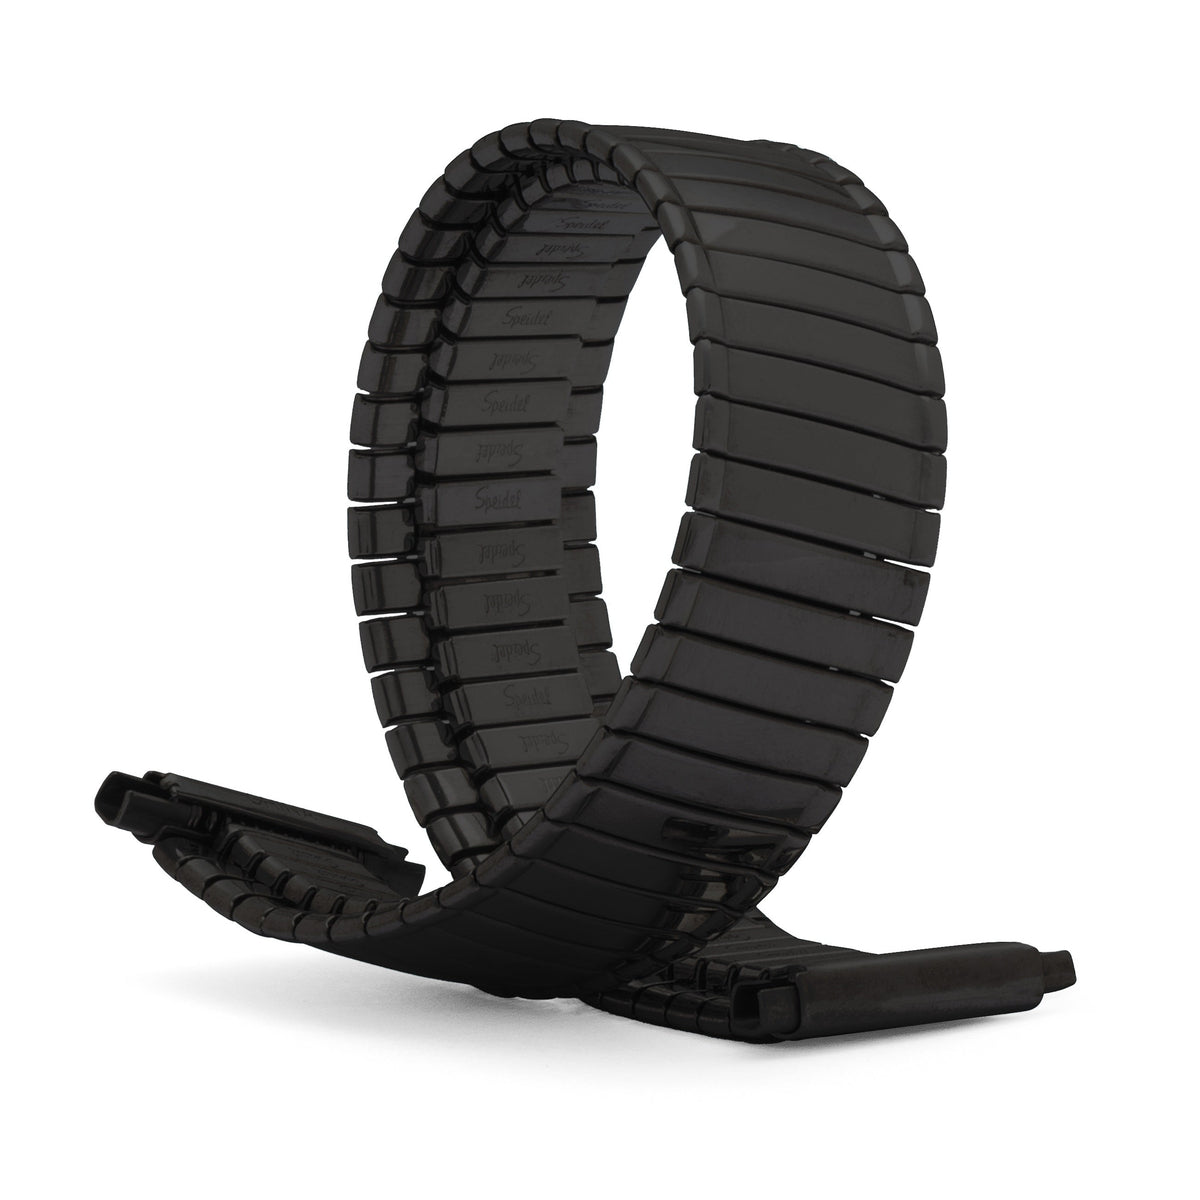 Twist-O-Flex™ Expandable Bands- Extra Long Watch Bands